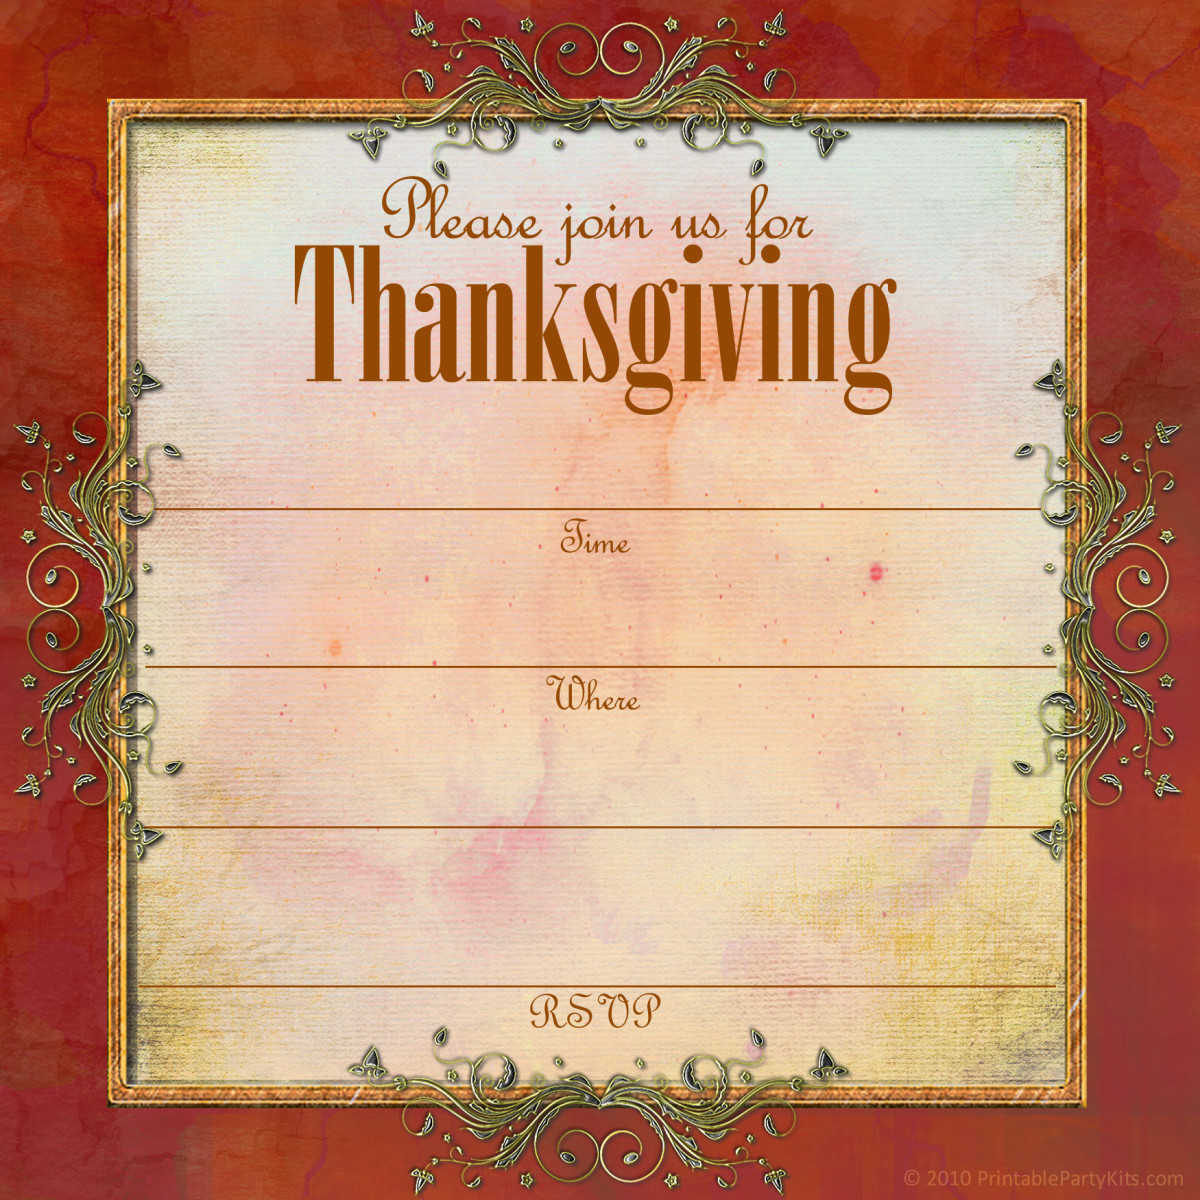 Free Printable Thanksgiving Invitations Templates HubPages